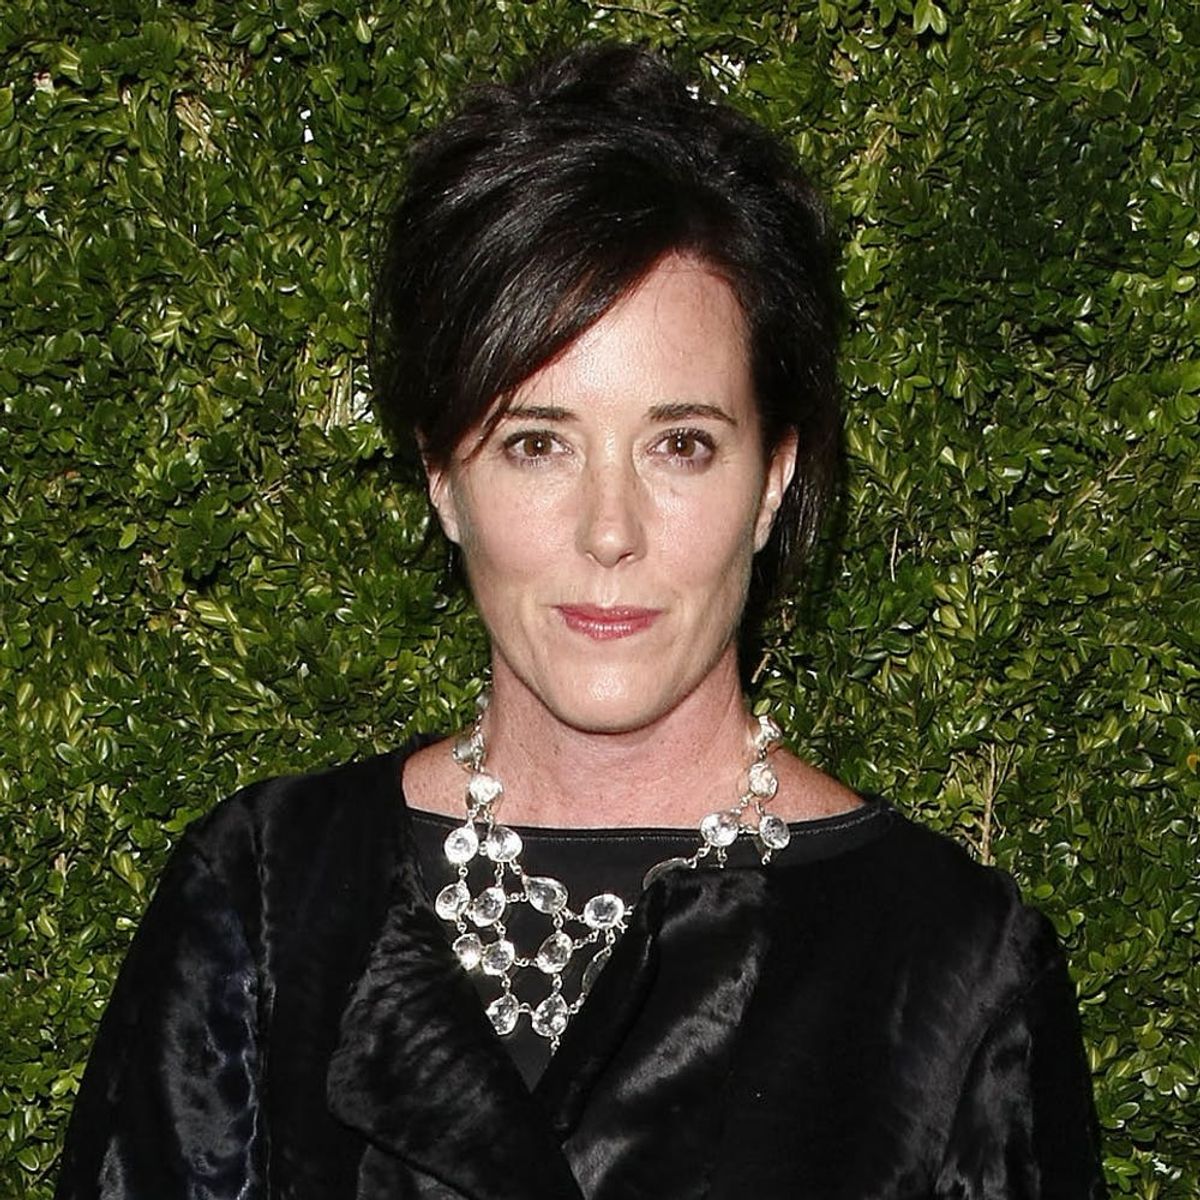 Kate Spade New York Will Donate $1 Million to Suicide Prevention and Mental Health Causes